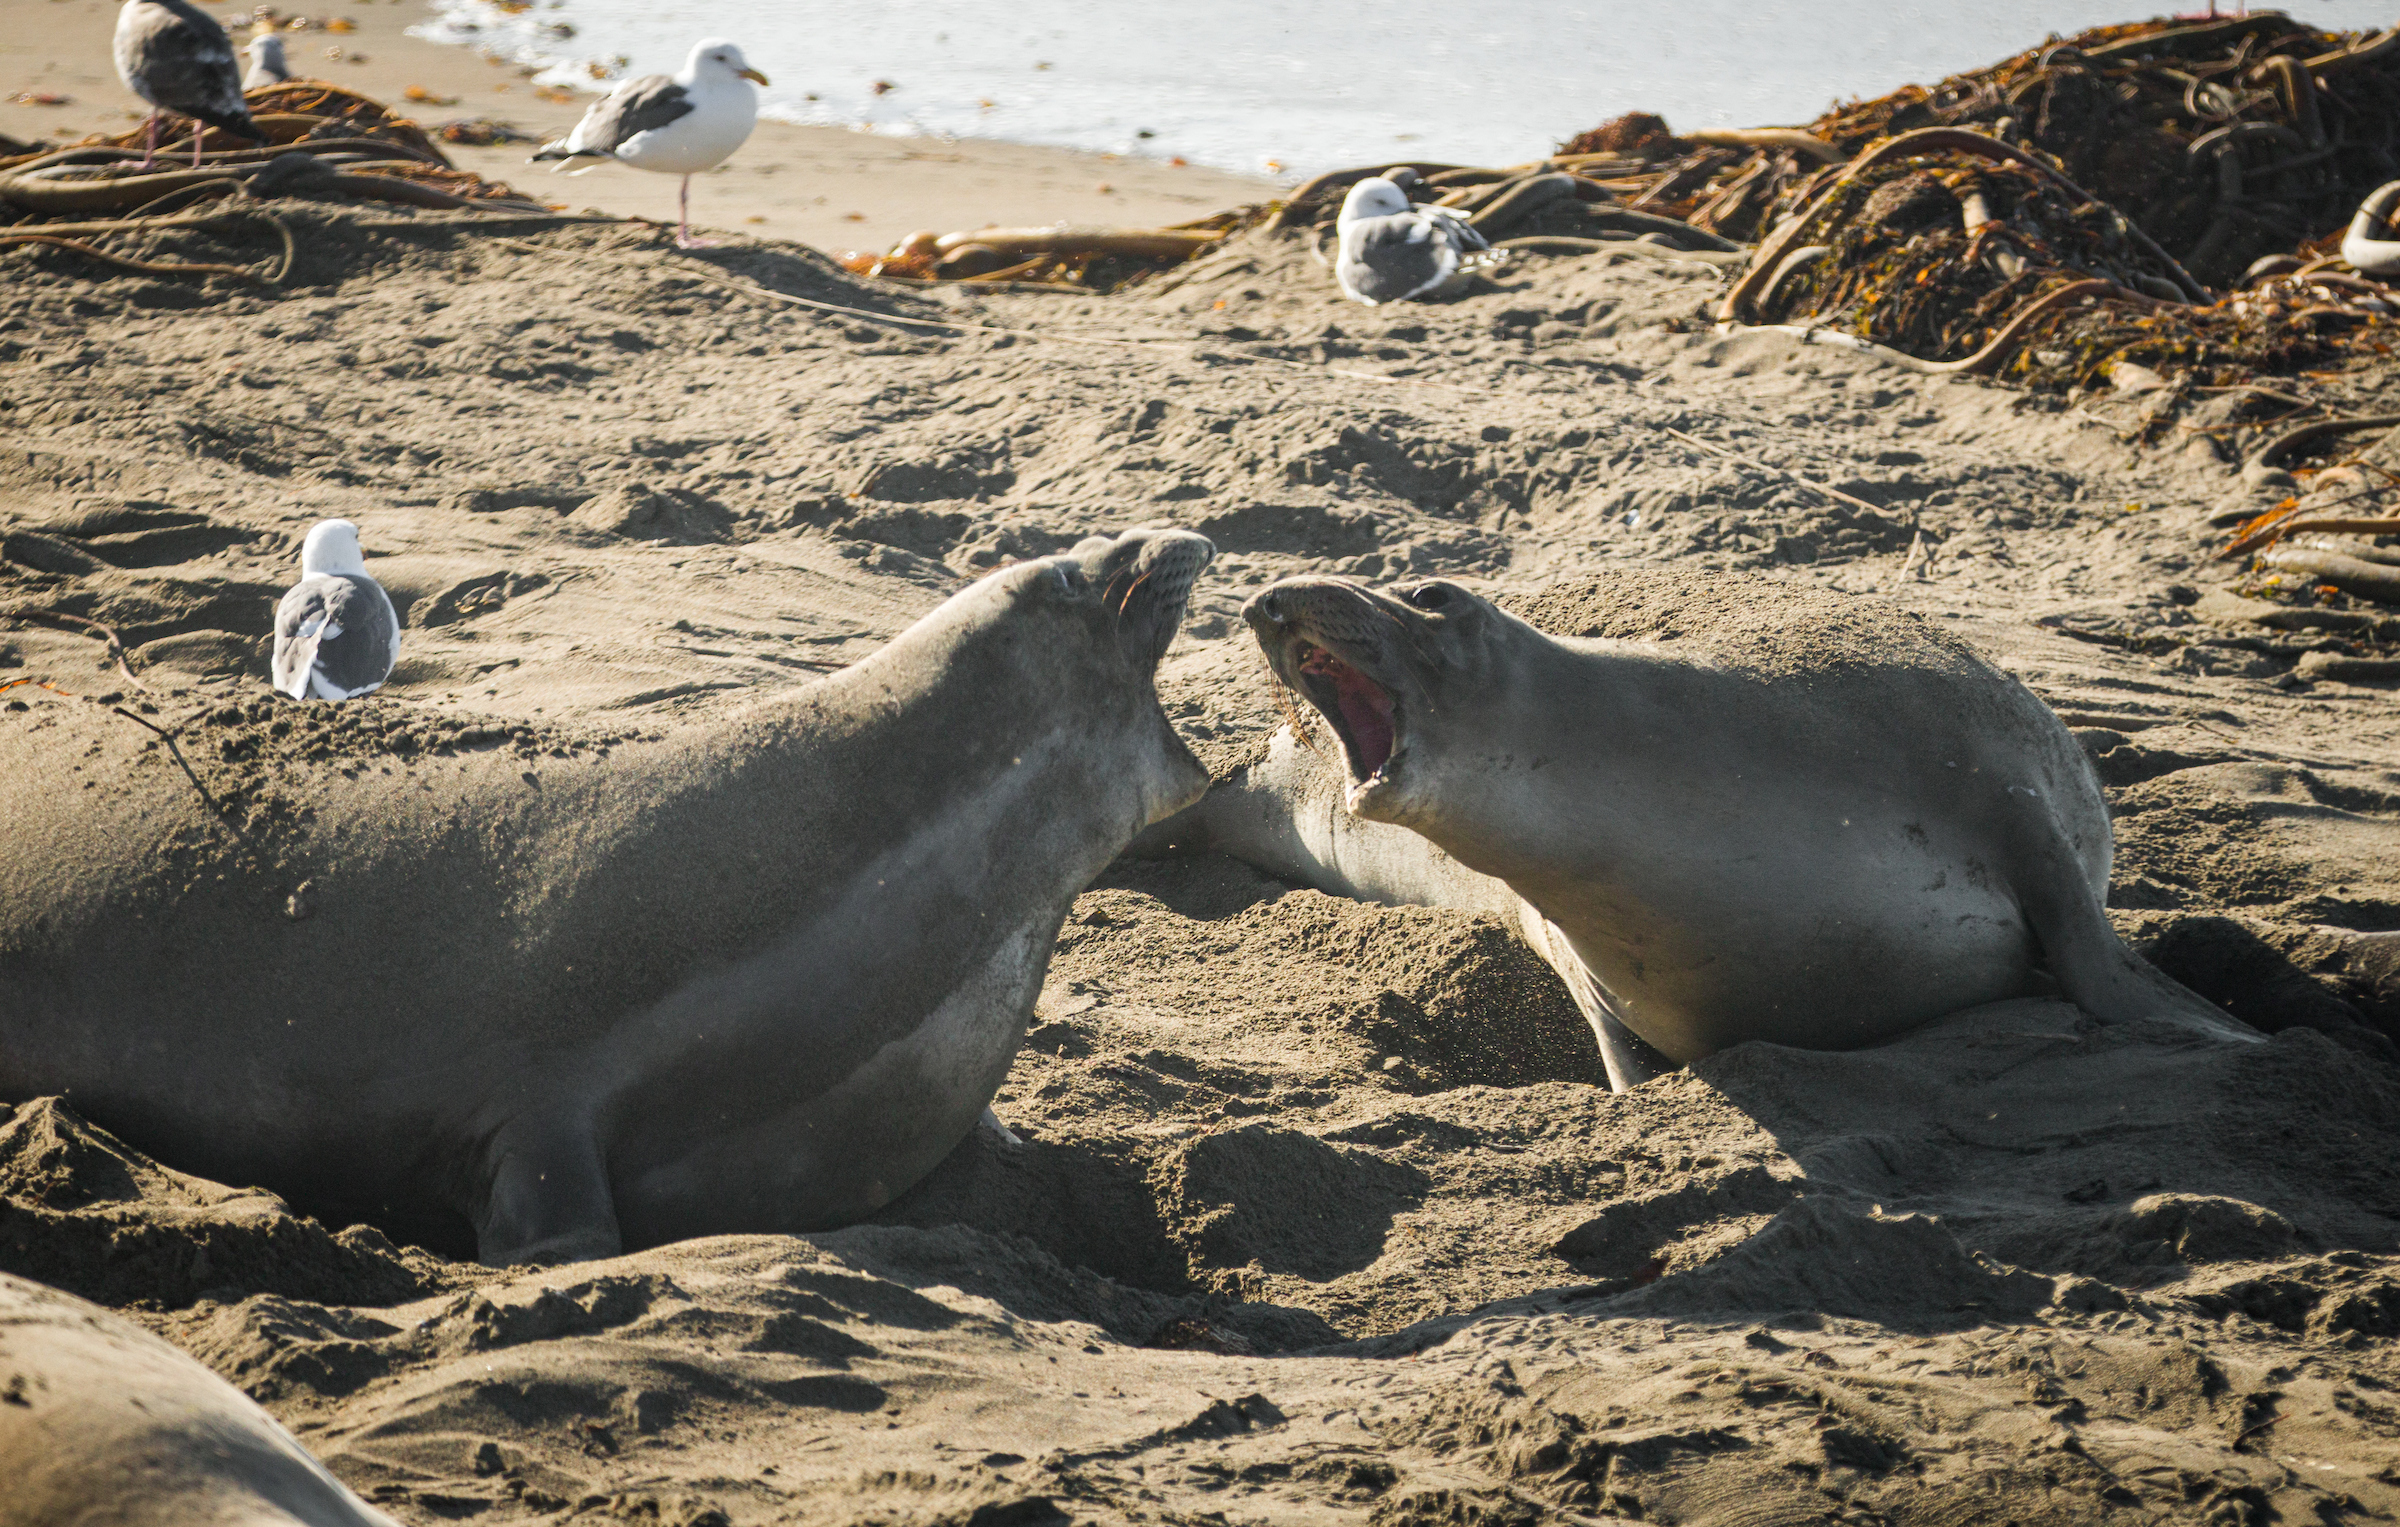 Two female elephant seals interact with each other at the Elephant Seal Vista Point beach. 